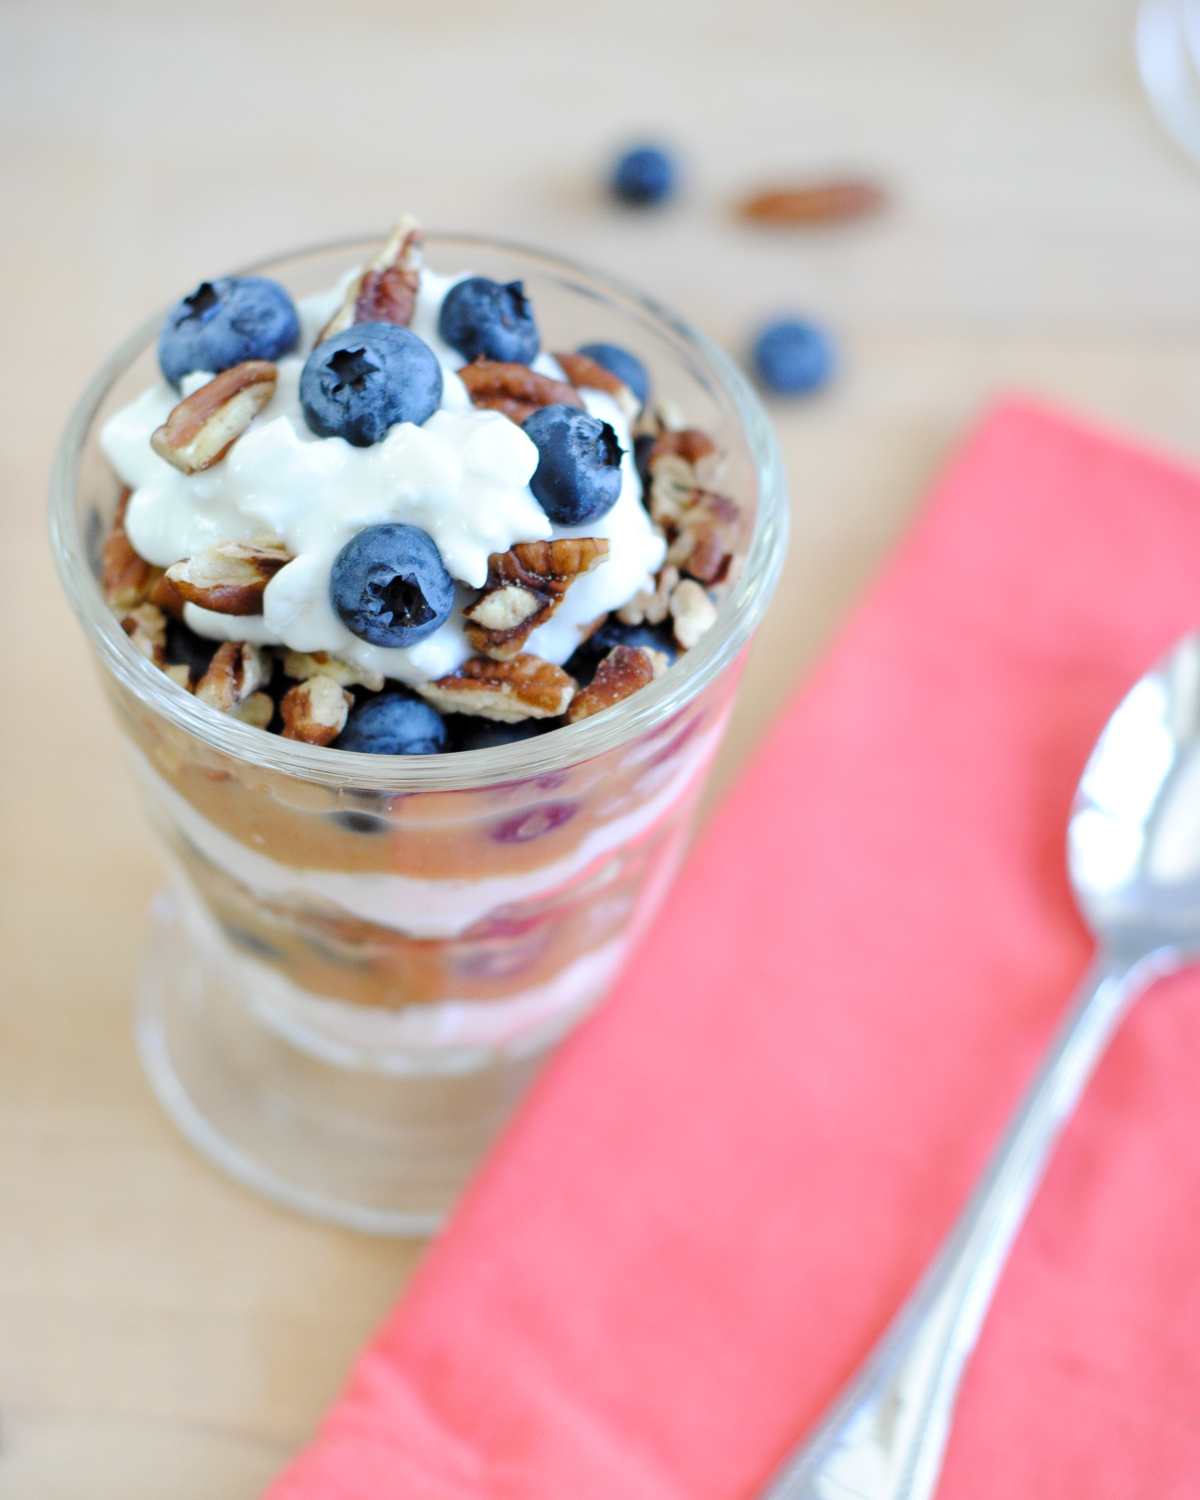 Cottage cheese parfait with spiced applesauce, blueberries, and pecans. Perfect for a healthy, protein-packed, calcium-rich breakfast, lunch, snack or dessert. Seriously TO DIE FOR!!